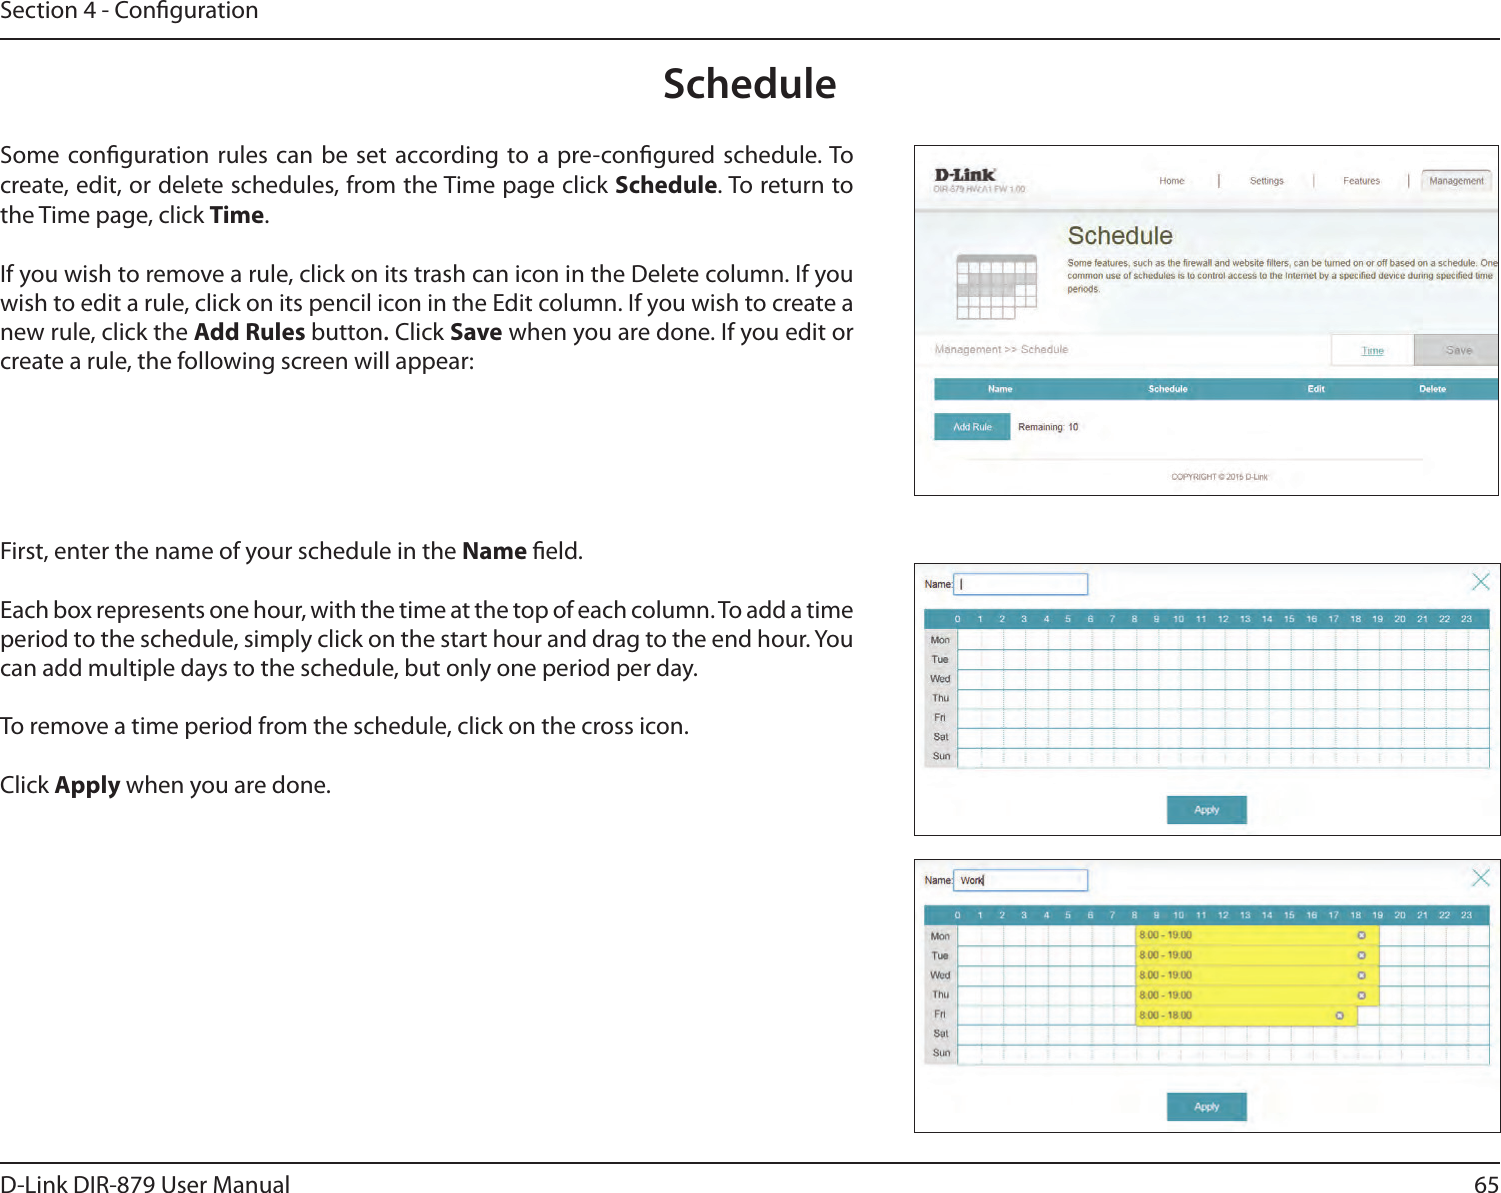 65D-Link DIR-879 User ManualSection 4 - CongurationScheduleSome conguration rules can be set according to a pre-congured schedule. To create, edit, or delete schedules, from the Time page click Schedule. To return to the Time page, click Time. If you wish to remove a rule, click on its trash can icon in the Delete column. If you wish to edit a rule, click on its pencil icon in the Edit column. If you wish to create a new rule, click the Add Rules button. Click Save when you are done. If you edit or create a rule, the following screen will appear:First, enter the name of your schedule in the Name eld.Each box represents one hour, with the time at the top of each column. To add a time period to the schedule, simply click on the start hour and drag to the end hour. You can add multiple days to the schedule, but only one period per day.To remove a time period from the schedule, click on the cross icon.Click Apply when you are done.